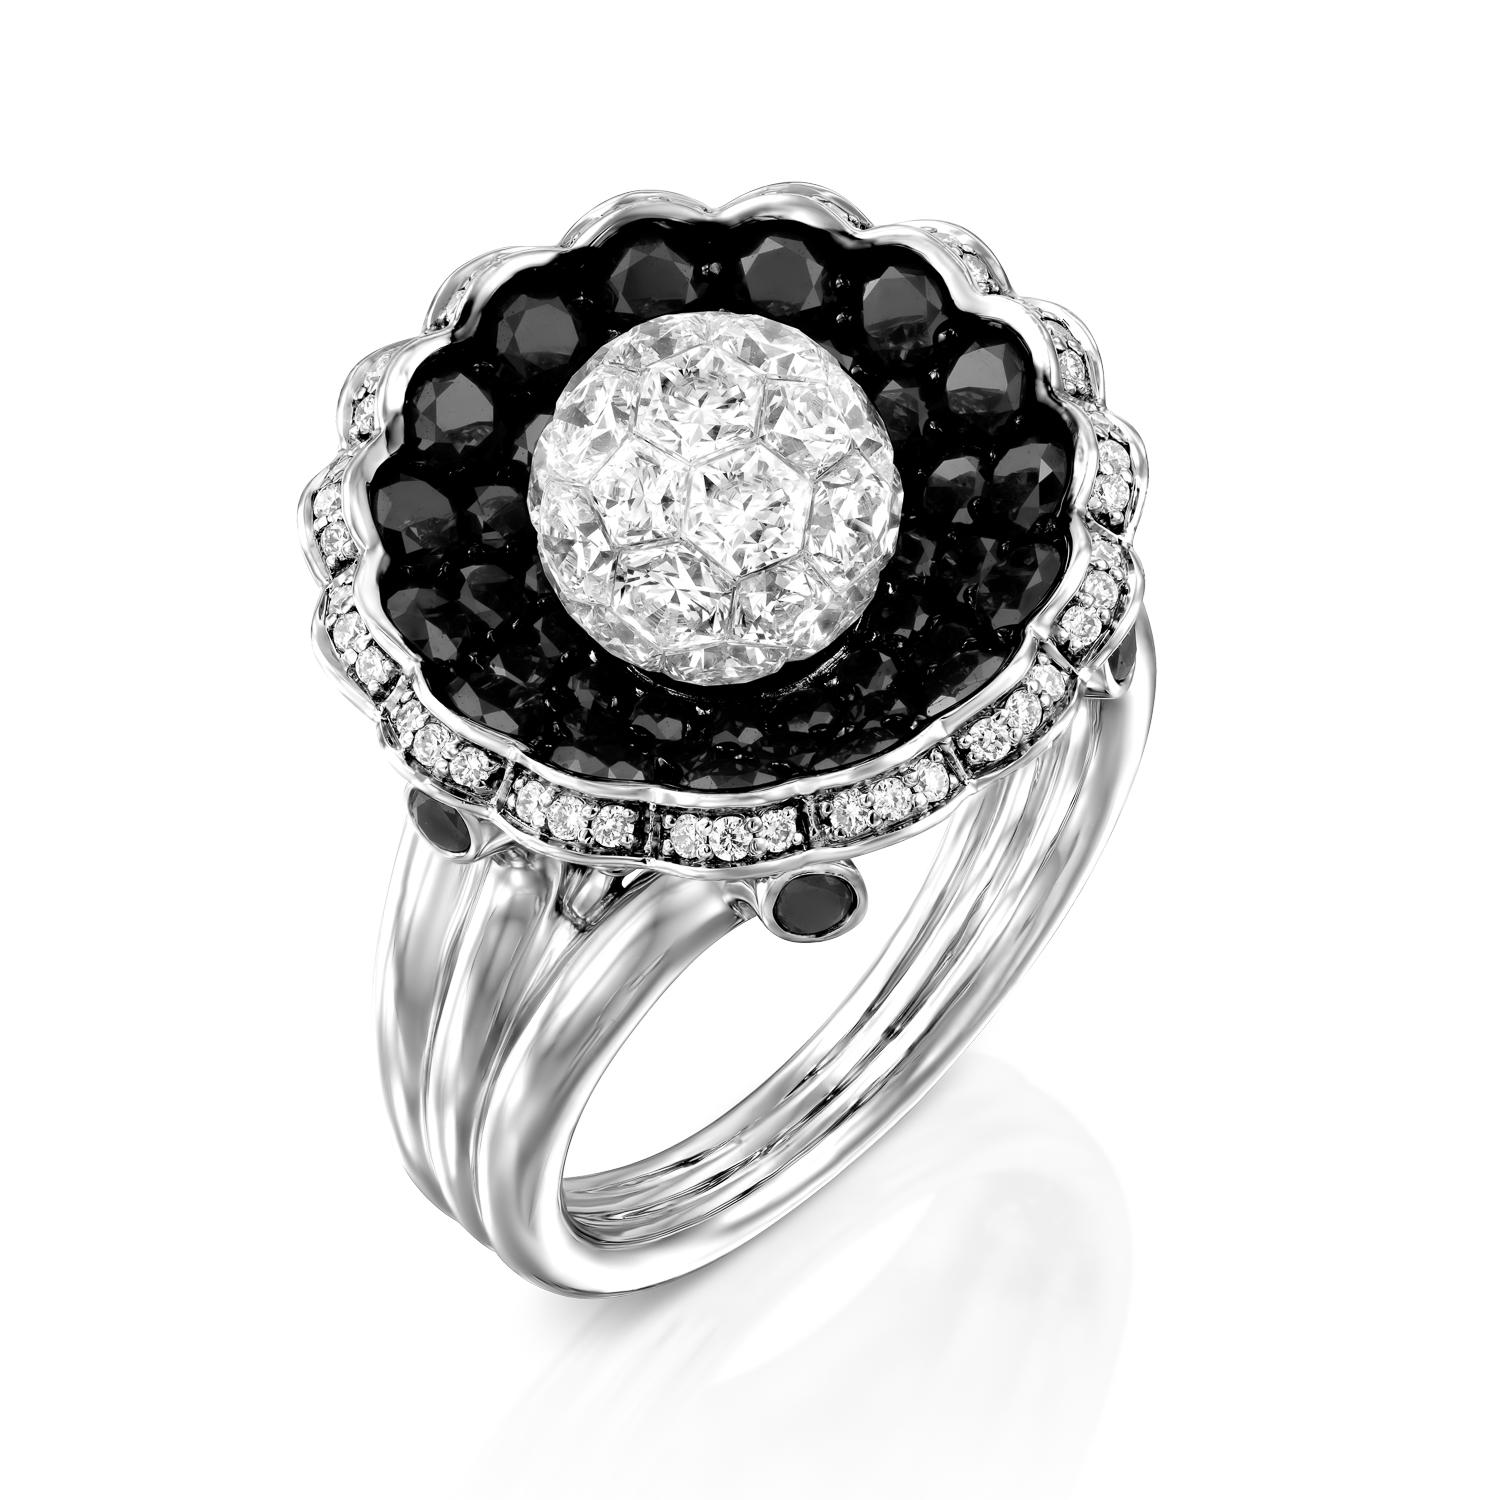 Indulge in the ultimate luxury with the Geraldo Diamond Sphere White Black Diamonds Invisible Setting Ring, a true masterpiece of jewelry design. Boasting a stunning Diamond Sphere made from an invisible set of round white diamonds weighing 3.69